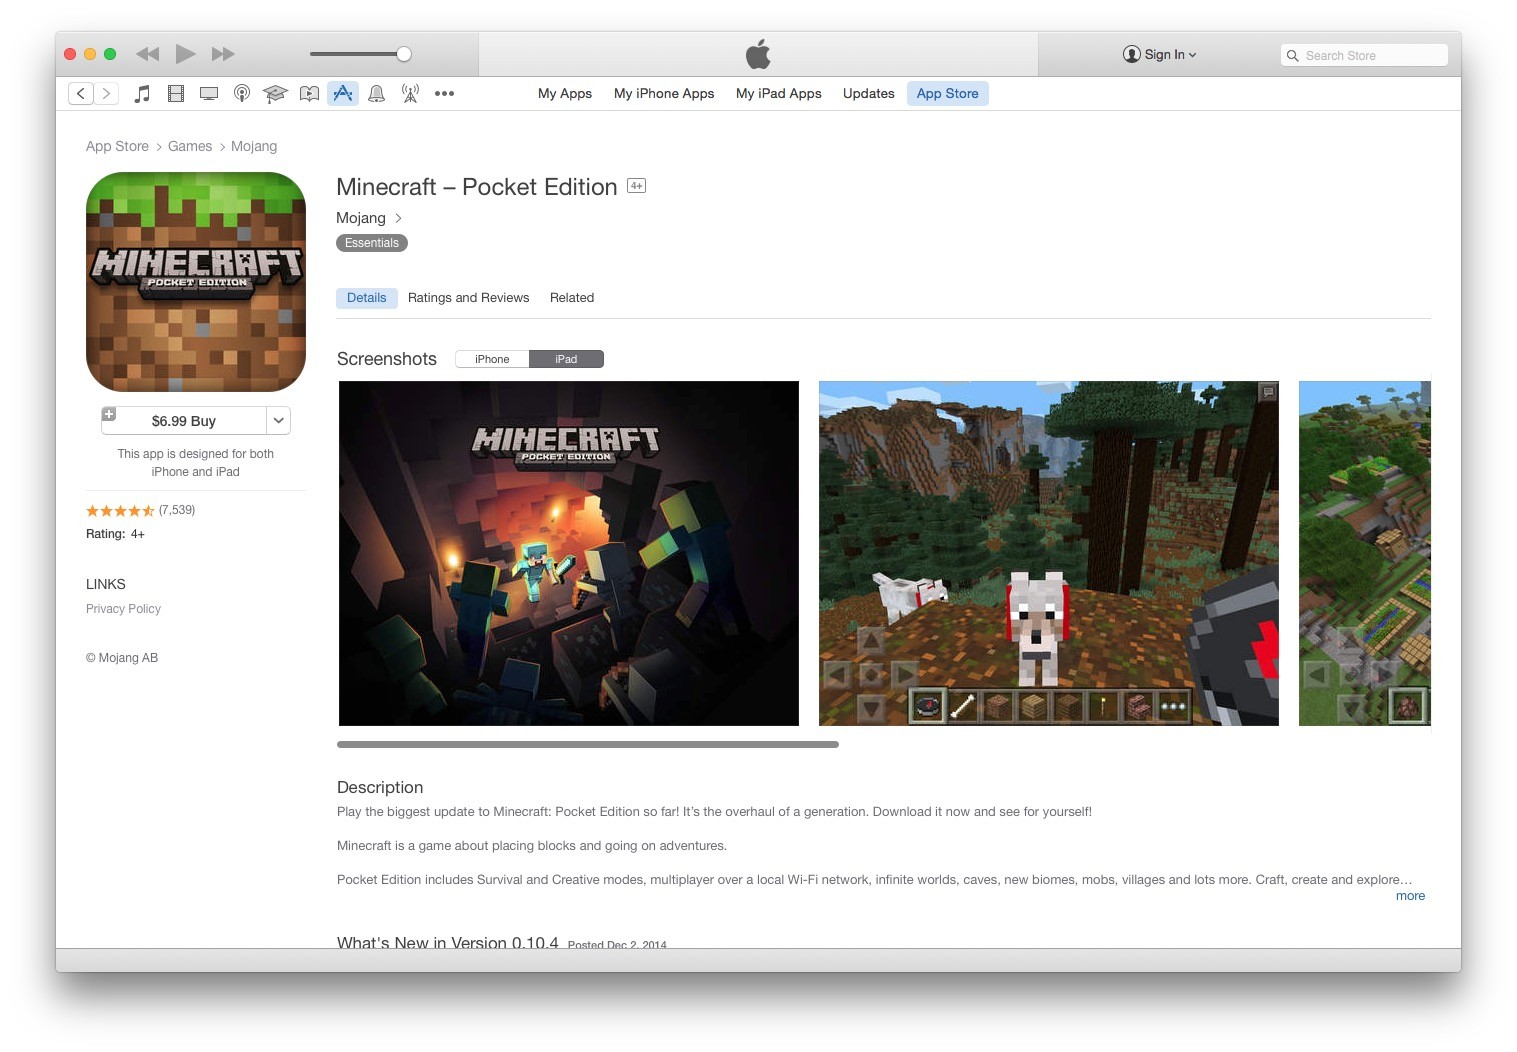 Minecraft on the App Store.  Pocket edition, Minecraft pocket edition, App